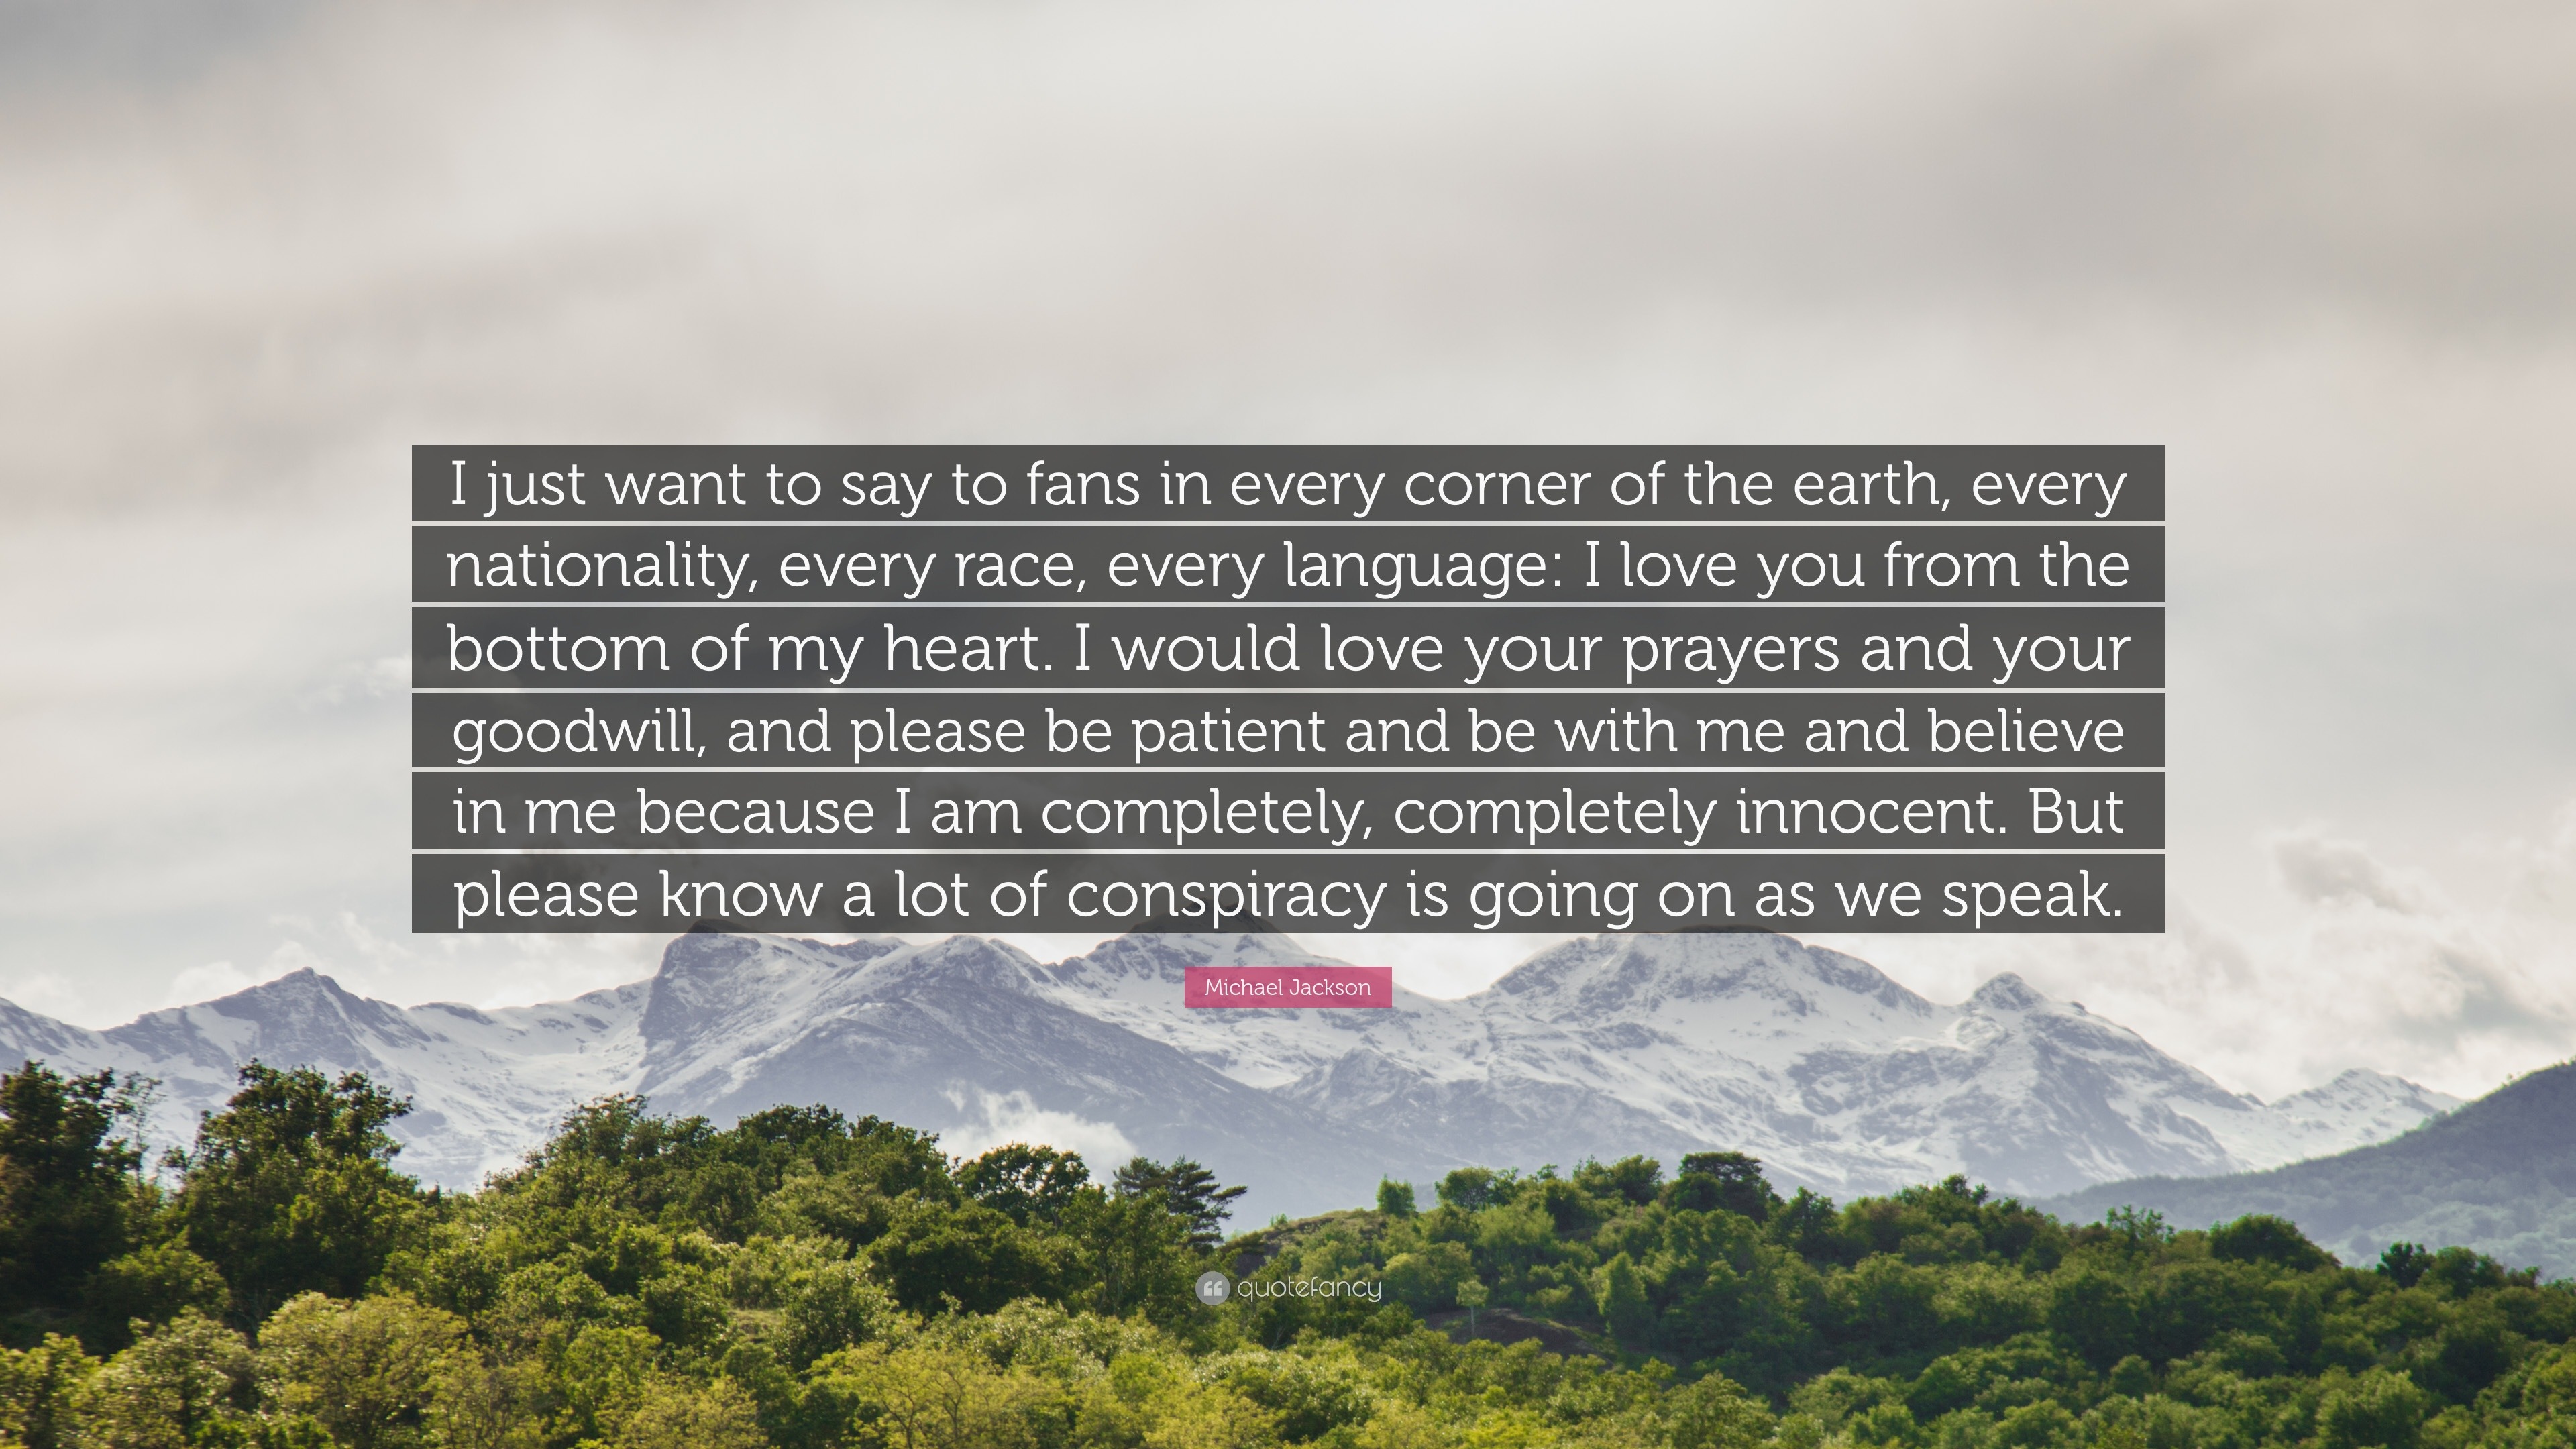 Michael Jackson Quote “I just want to say to fans in every corner of